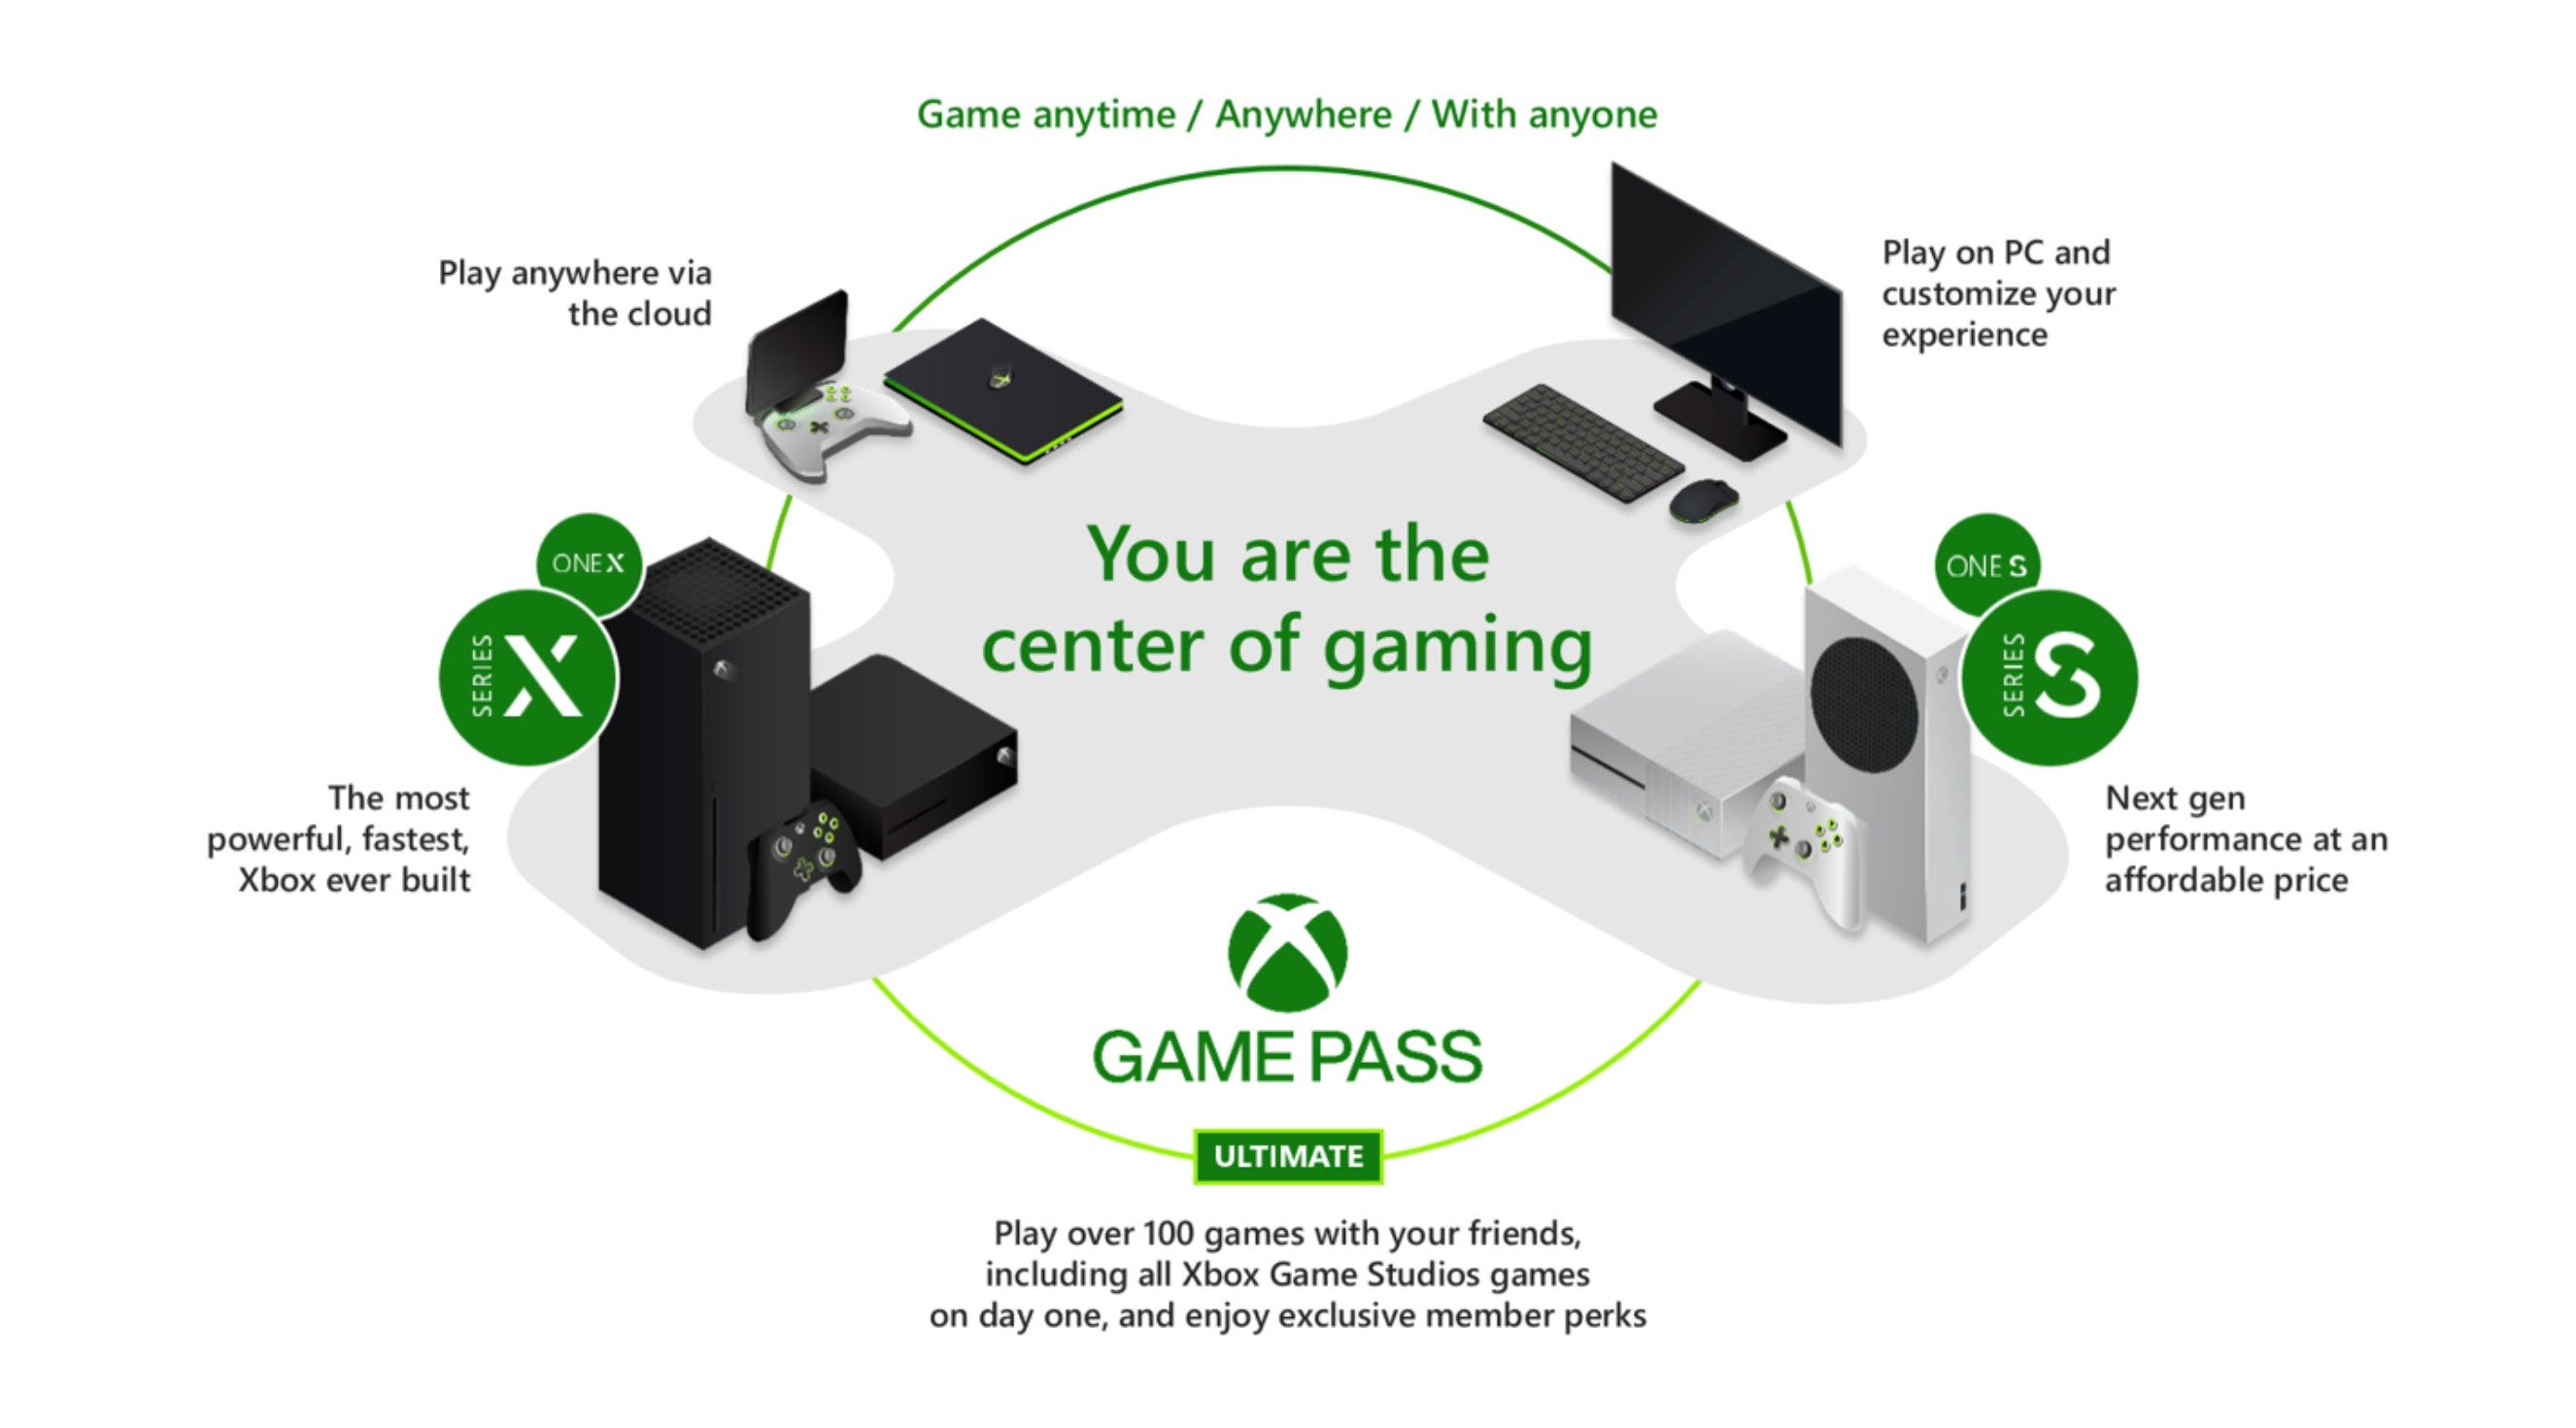 Is Game Pass' dominance a hurdle to the Activision acquisition